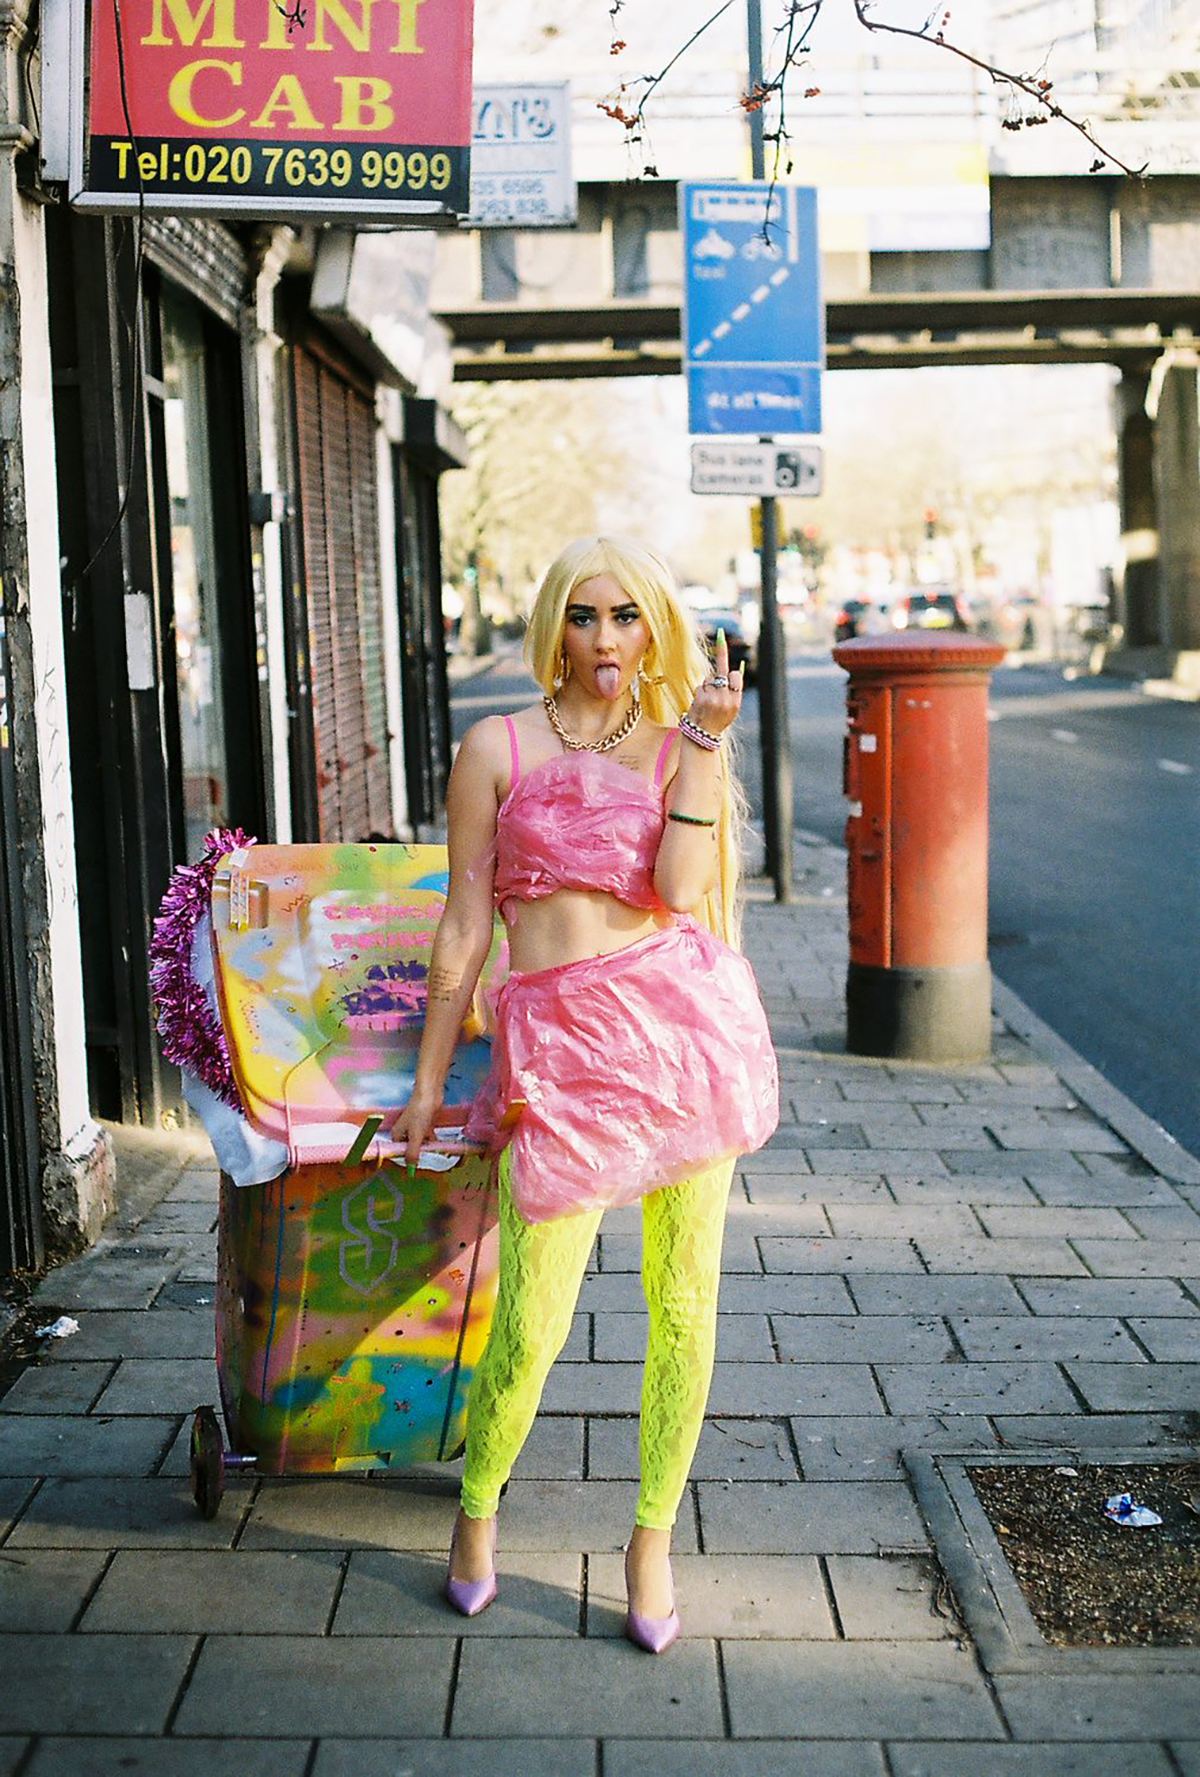 An image of a woman dressed in fluorescent clothes, wheeling a fluorescent wheelie bin down a street, while the other hand shows a middle finger.